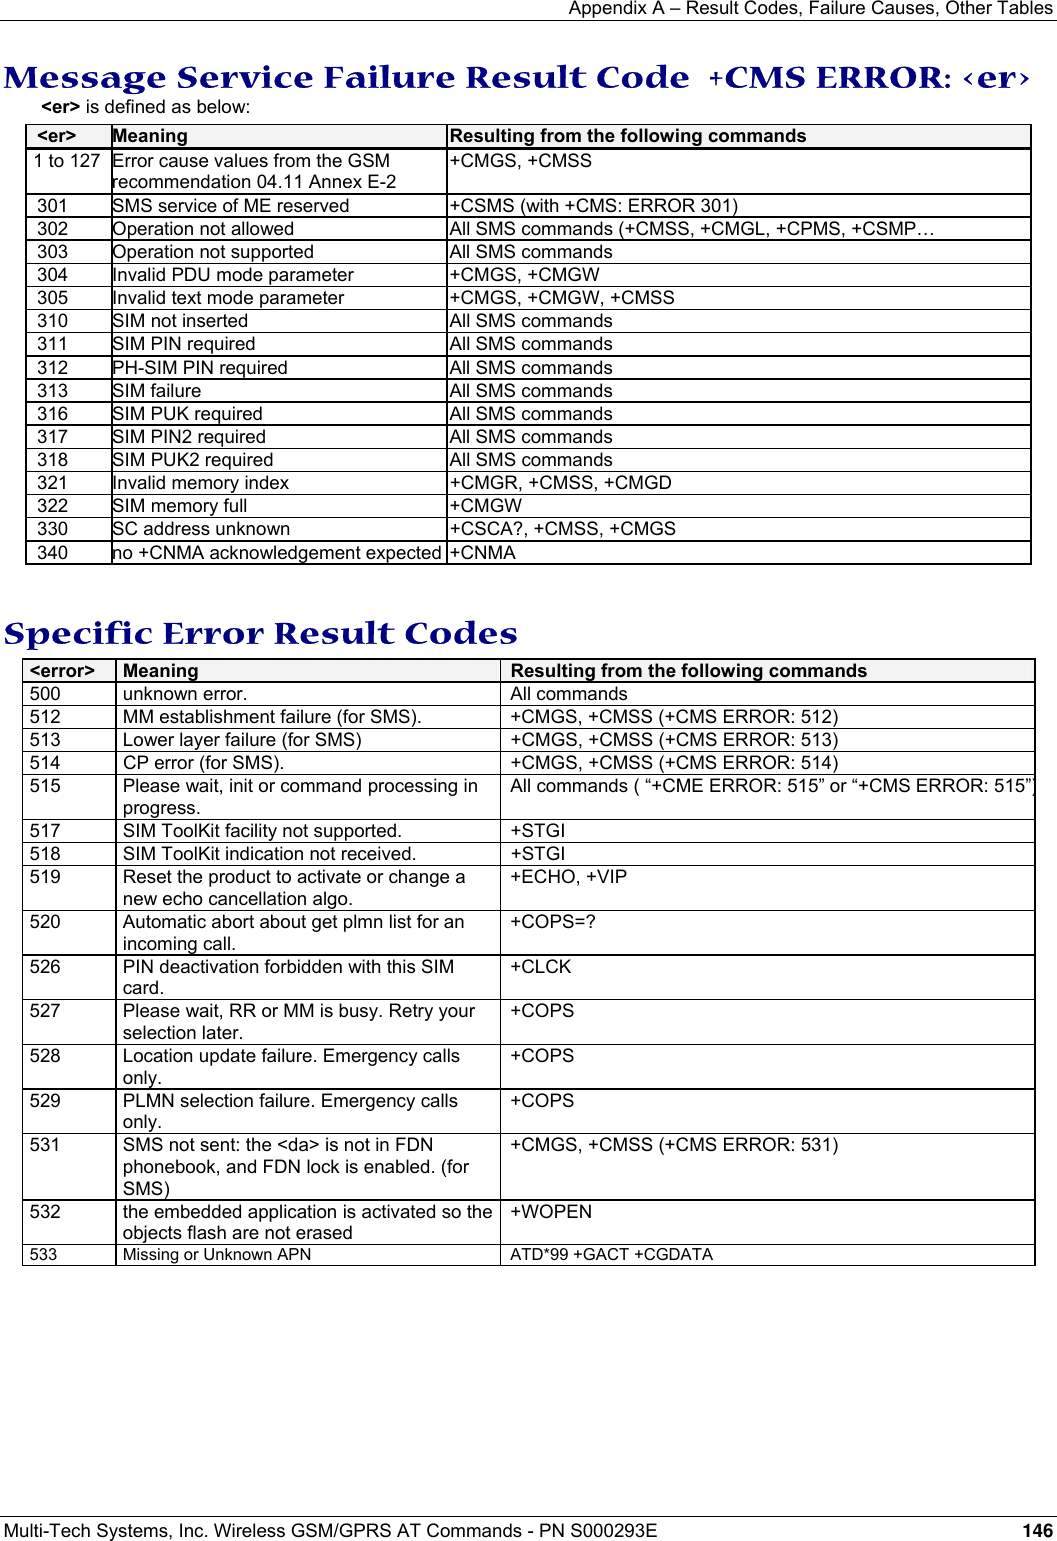 Appendix A – Result Codes, Failure Causes, Other Tables Multi-Tech Systems, Inc. Wireless GSM/GPRS AT Commands - PN S000293E 146  Message Service Failure Result Code  +CMS ERROR: &lt;er&gt; &lt;er&gt; is defined as below: &lt;er&gt;   Meaning  Resulting from the following commands  1 to 127  Error cause values from the GSM recommendation 04.11 Annex E-2 +CMGS, +CMSS 301  SMS service of ME reserved  +CSMS (with +CMS: ERROR 301) 302  Operation not allowed  All SMS commands (+CMSS, +CMGL, +CPMS, +CSMP… 303 Operation not supported  All SMS commands 304  Invalid PDU mode parameter +CMGS, +CMGW 305  Invalid text mode parameter +CMGS, +CMGW, +CMSS 310  SIM not inserted  All SMS commands 311  SIM PIN required  All SMS commands 312  PH-SIM PIN required  All SMS commands 313  SIM failure  All SMS commands 316  SIM PUK required  All SMS commands 317  SIM PIN2 required  All SMS commands 318  SIM PUK2 required  All SMS commands 321  Invalid memory index  +CMGR, +CMSS, +CMGD 322  SIM memory full  +CMGW 330  SC address unknown  +CSCA?, +CMSS, +CMGS 340  no +CNMA acknowledgement expected +CNMA  Specific Error Result Codes &lt;error&gt;   Meaning  Resulting from the following commands 500 unknown error.  All commands 512  MM establishment failure (for SMS).  +CMGS, +CMSS (+CMS ERROR: 512) 513  Lower layer failure (for SMS)  +CMGS, +CMSS (+CMS ERROR: 513) 514  CP error (for SMS).  +CMGS, +CMSS (+CMS ERROR: 514) 515  Please wait, init or command processing in progress. All commands ( “+CME ERROR: 515” or “+CMS ERROR: 515”)517  SIM ToolKit facility not supported.  +STGI 518  SIM ToolKit indication not received.  +STGI 519  Reset the product to activate or change a new echo cancellation algo. +ECHO, +VIP 520  Automatic abort about get plmn list for an incoming call. +COPS=? 526  PIN deactivation forbidden with this SIM card. +CLCK 527  Please wait, RR or MM is busy. Retry your selection later. +COPS 528  Location update failure. Emergency calls only. +COPS 529  PLMN selection failure. Emergency calls only. +COPS 531  SMS not sent: the &lt;da&gt; is not in FDN phonebook, and FDN lock is enabled. (for SMS) +CMGS, +CMSS (+CMS ERROR: 531)  532 the embedded application is activated so the objects flash are not erased +WOPEN 533  Missing or Unknown APN  ATD*99 +GACT +CGDATA  